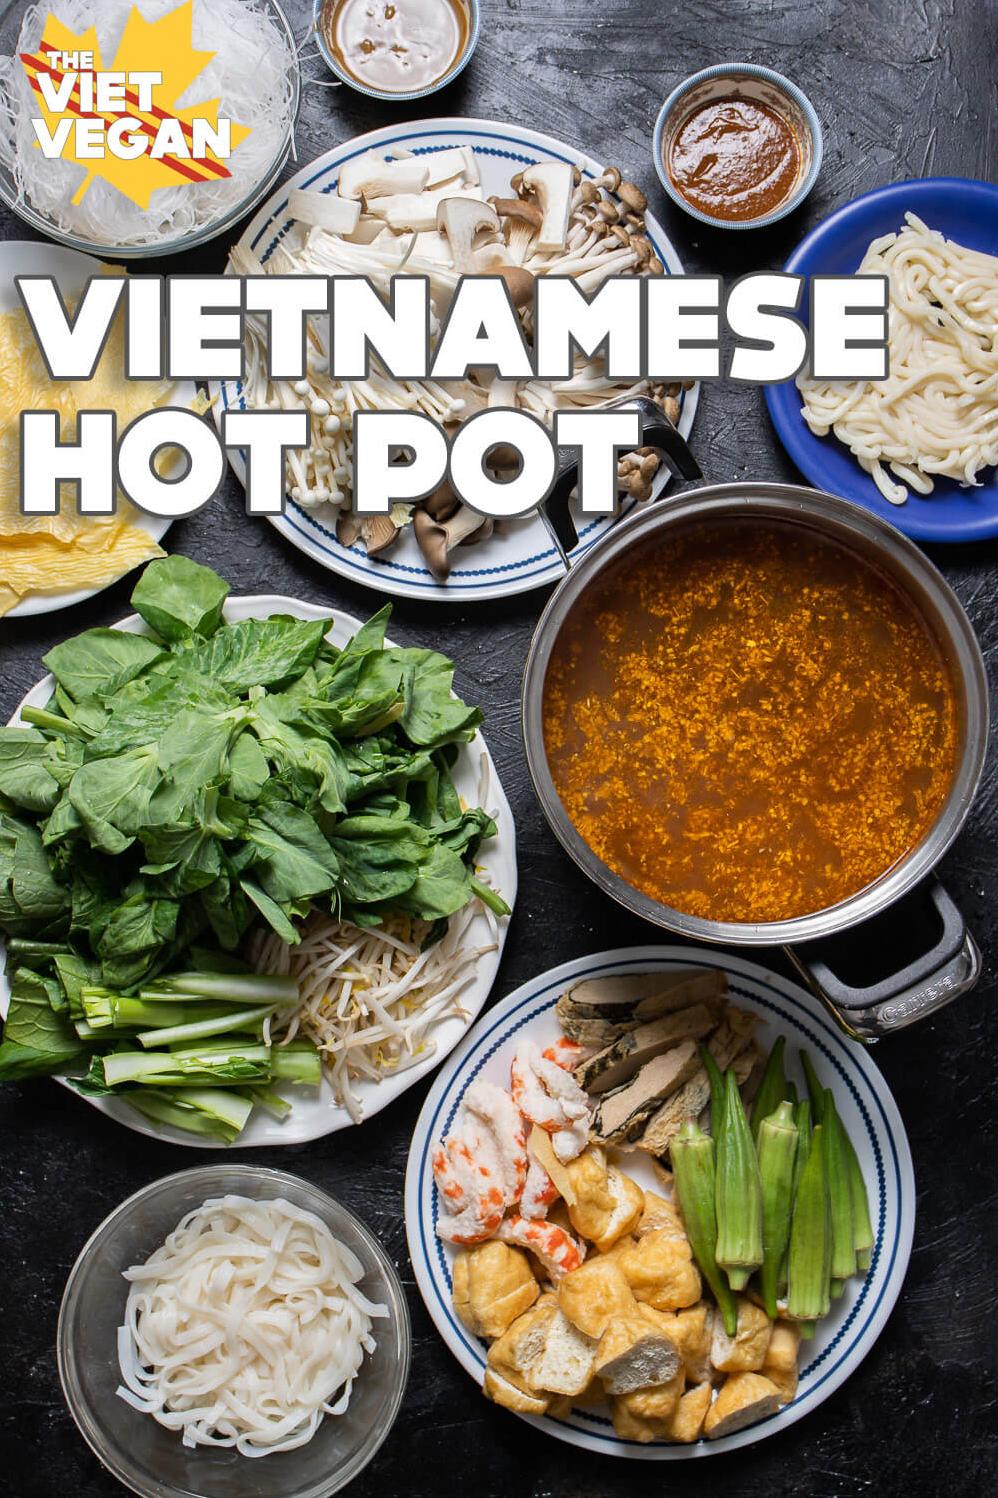  Aromatic and full of flavor, this hot pot is a feast for your senses